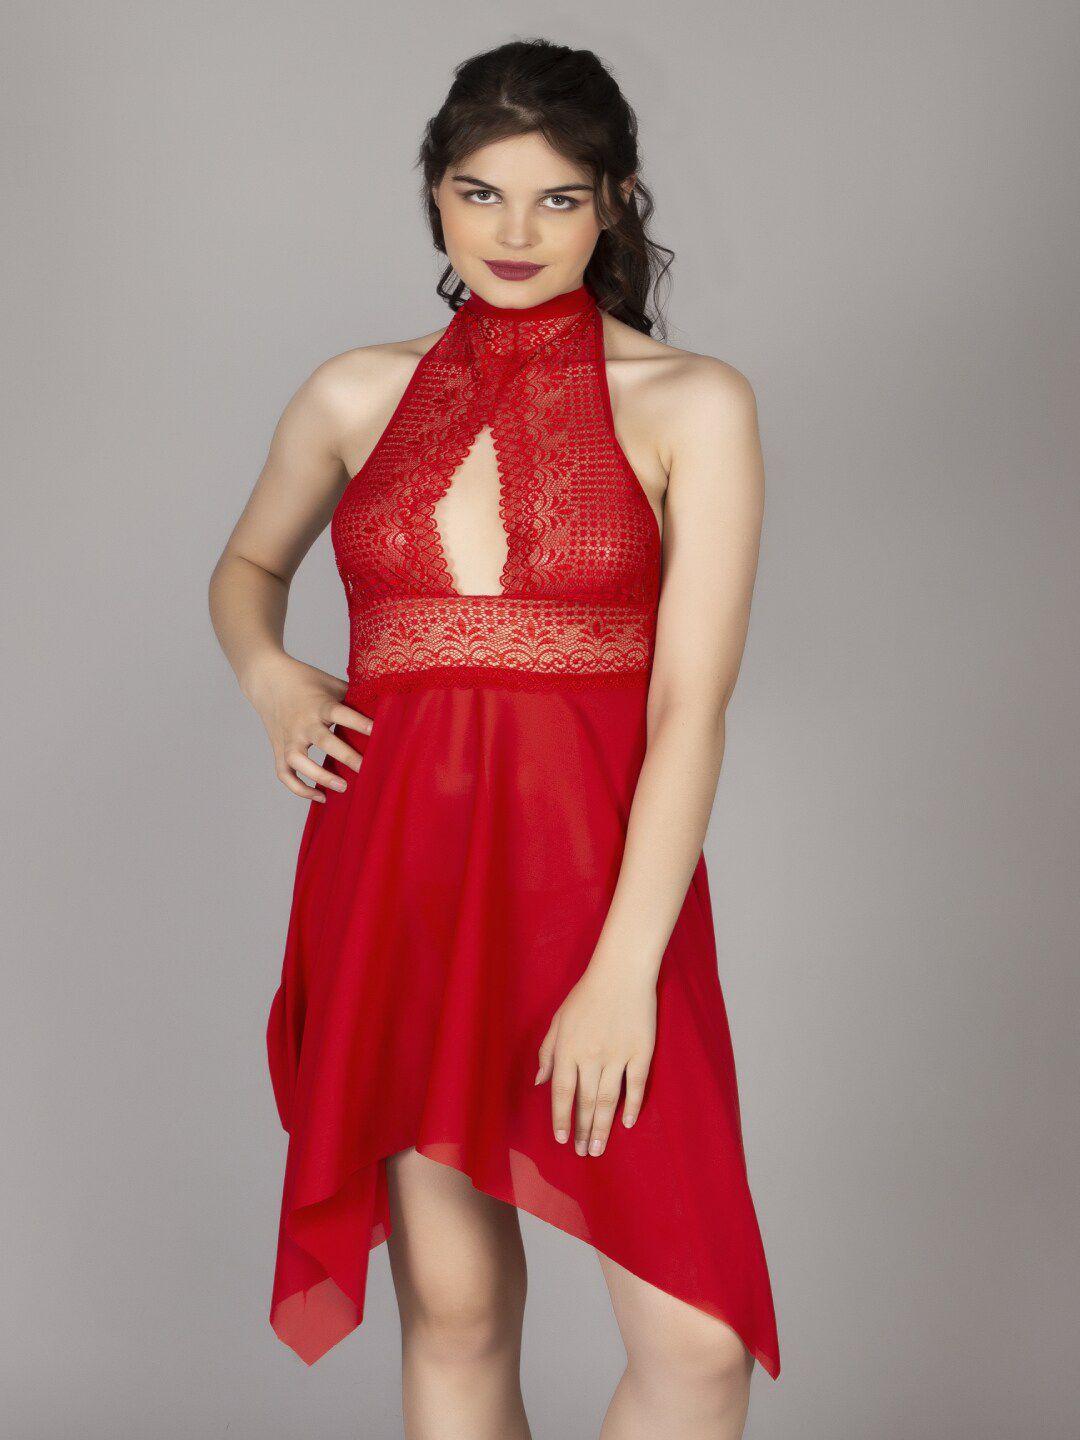 herryqeal red net halter neck baby doll with asymmetric